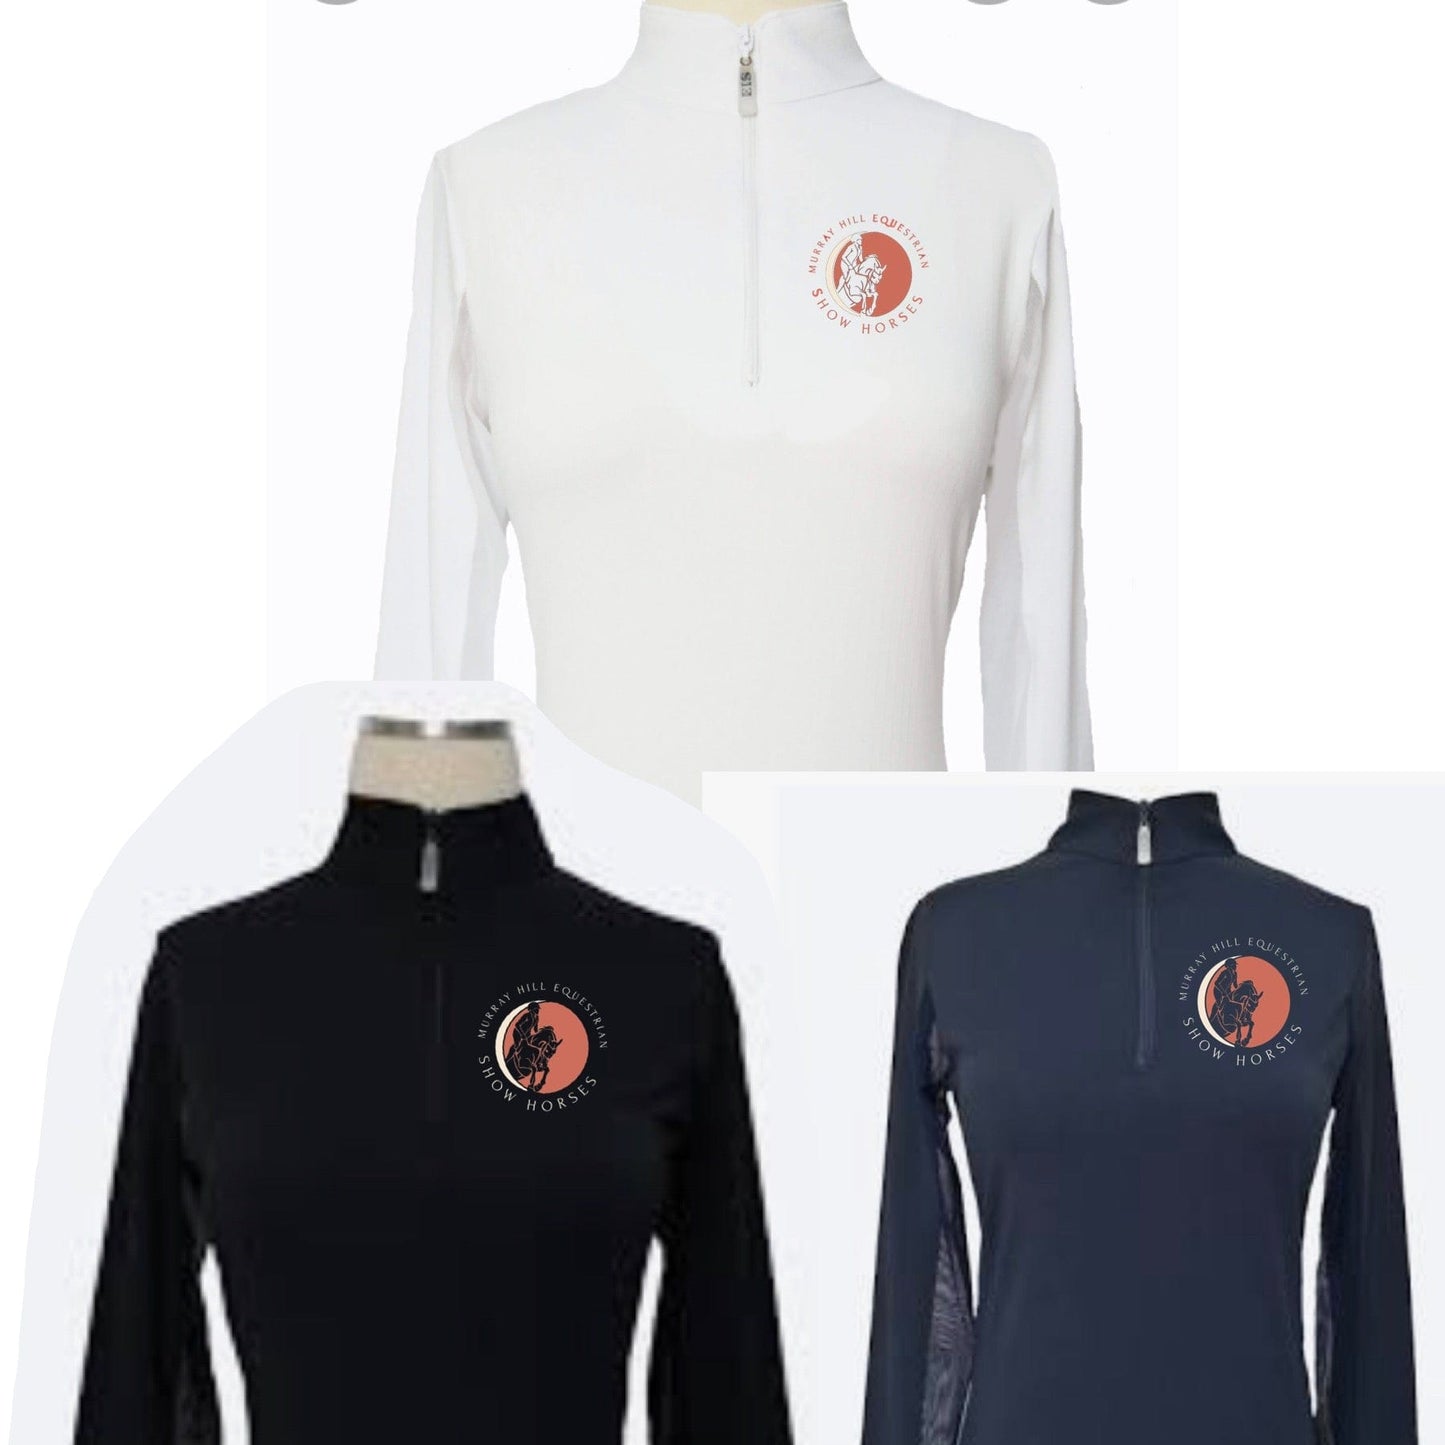 Equestrian Team Apparel Murray Hill Equestrian Sun Shirt equestrian team apparel online tack store mobile tack store custom farm apparel custom show stable clothing equestrian lifestyle horse show clothing riding clothes horses equestrian tack store